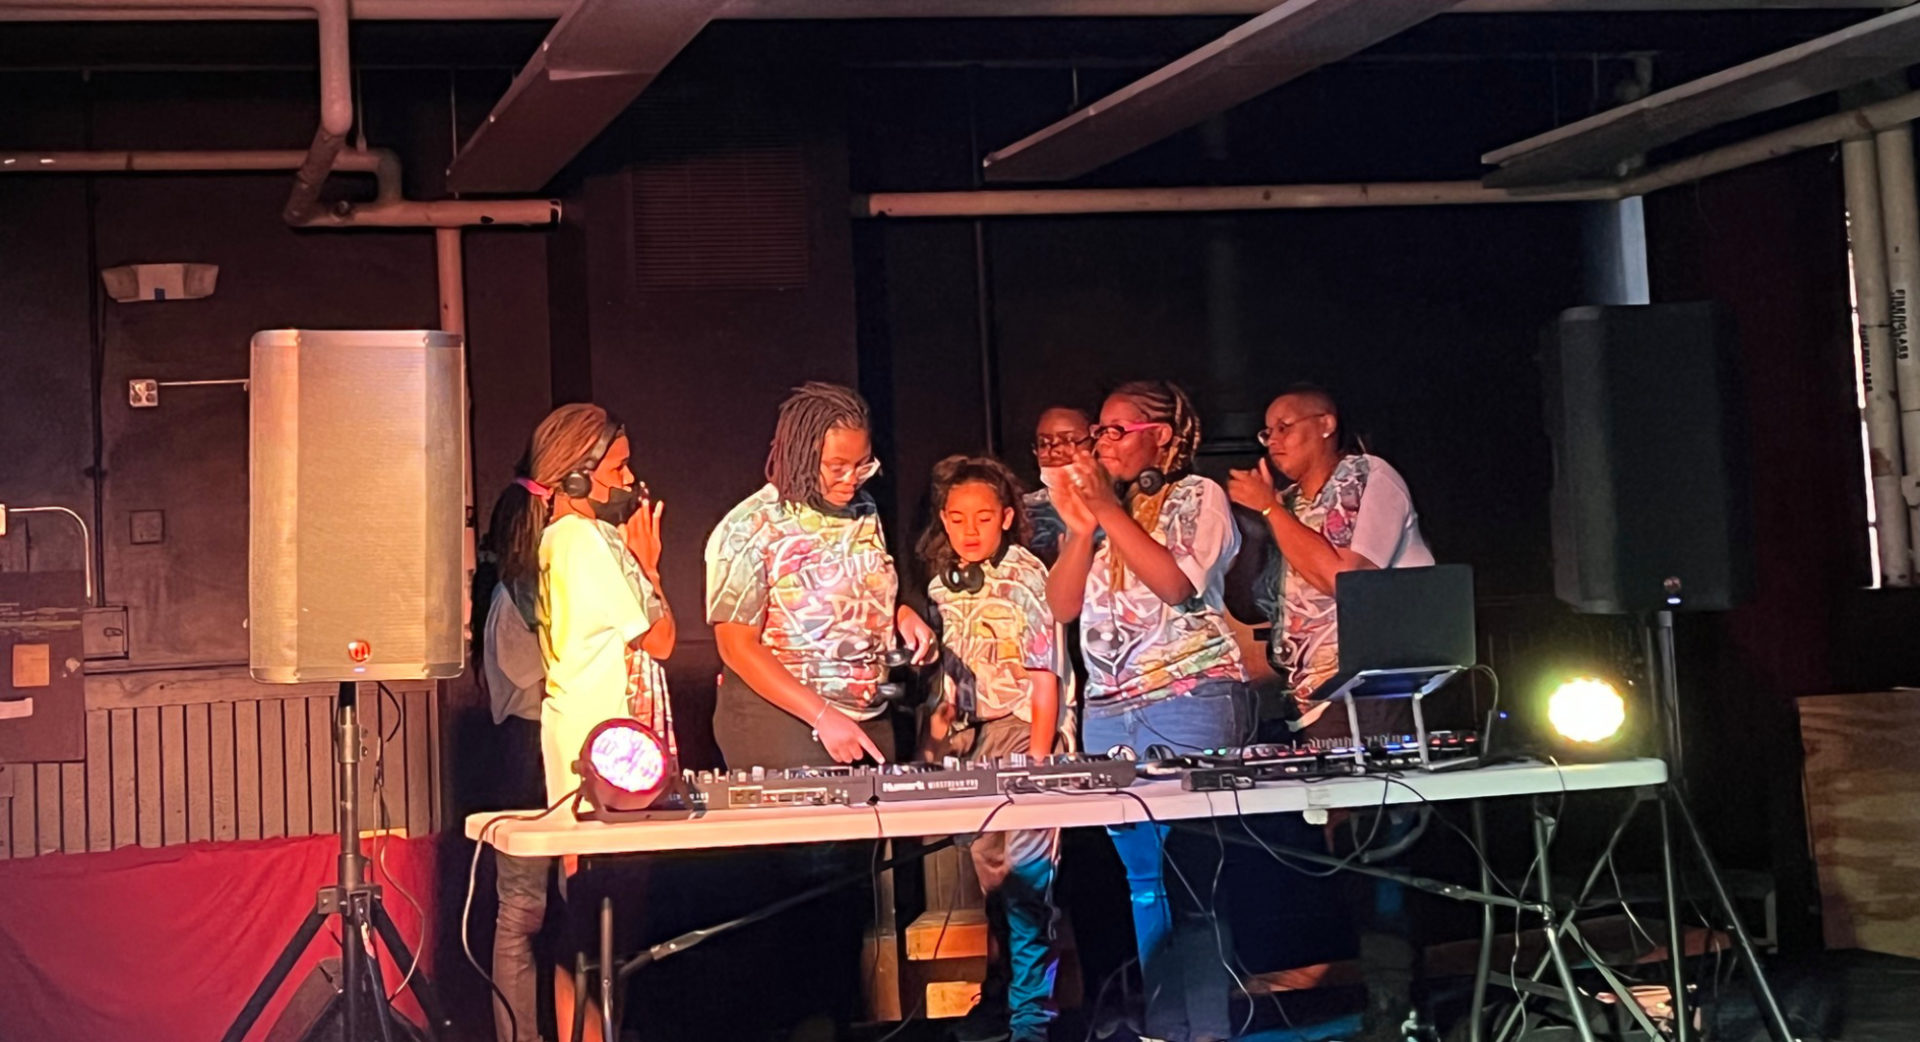 Six Black young girls and women stand around a table covered in DJing equipment. They all appear to be wearing the same t-shirt. Some of the people are clapping.